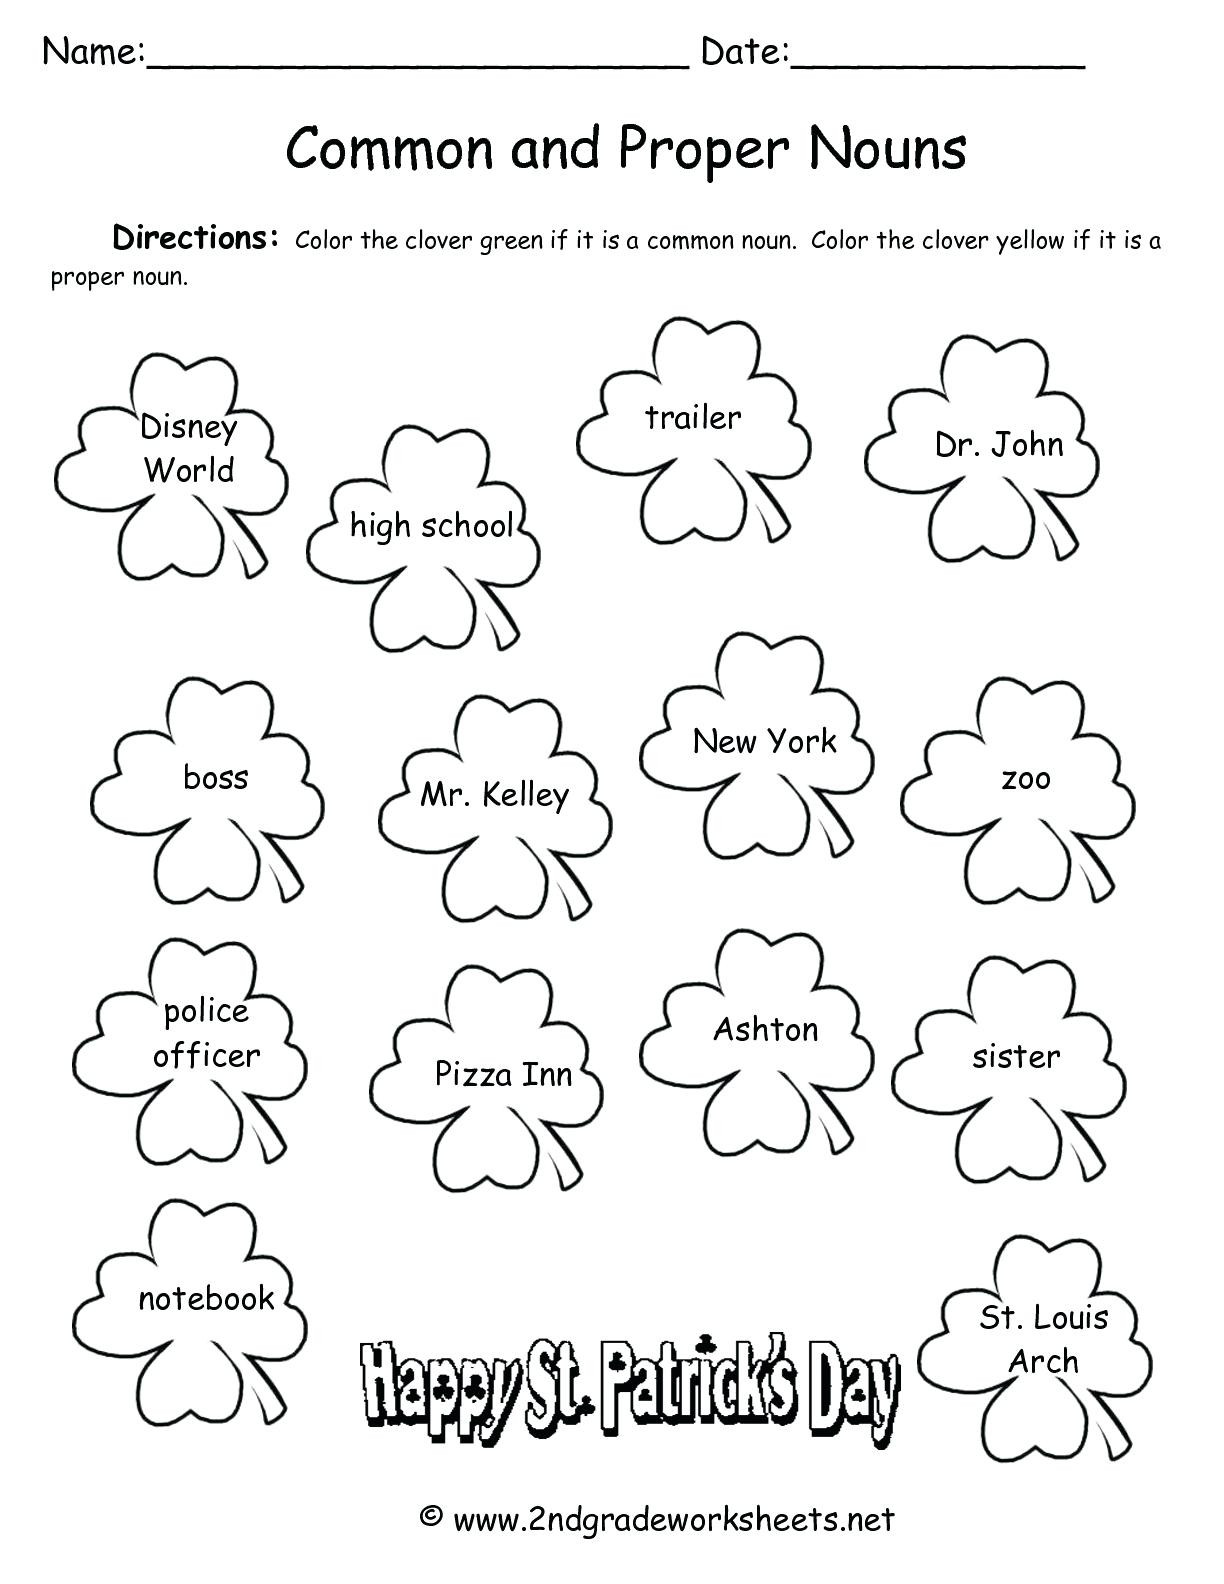 decimal division problems 5th grade printable mazes for toddlers two step equations word worksheet answers math games 3rd graders free 1st kids mon core exam worksheets 4th pres year